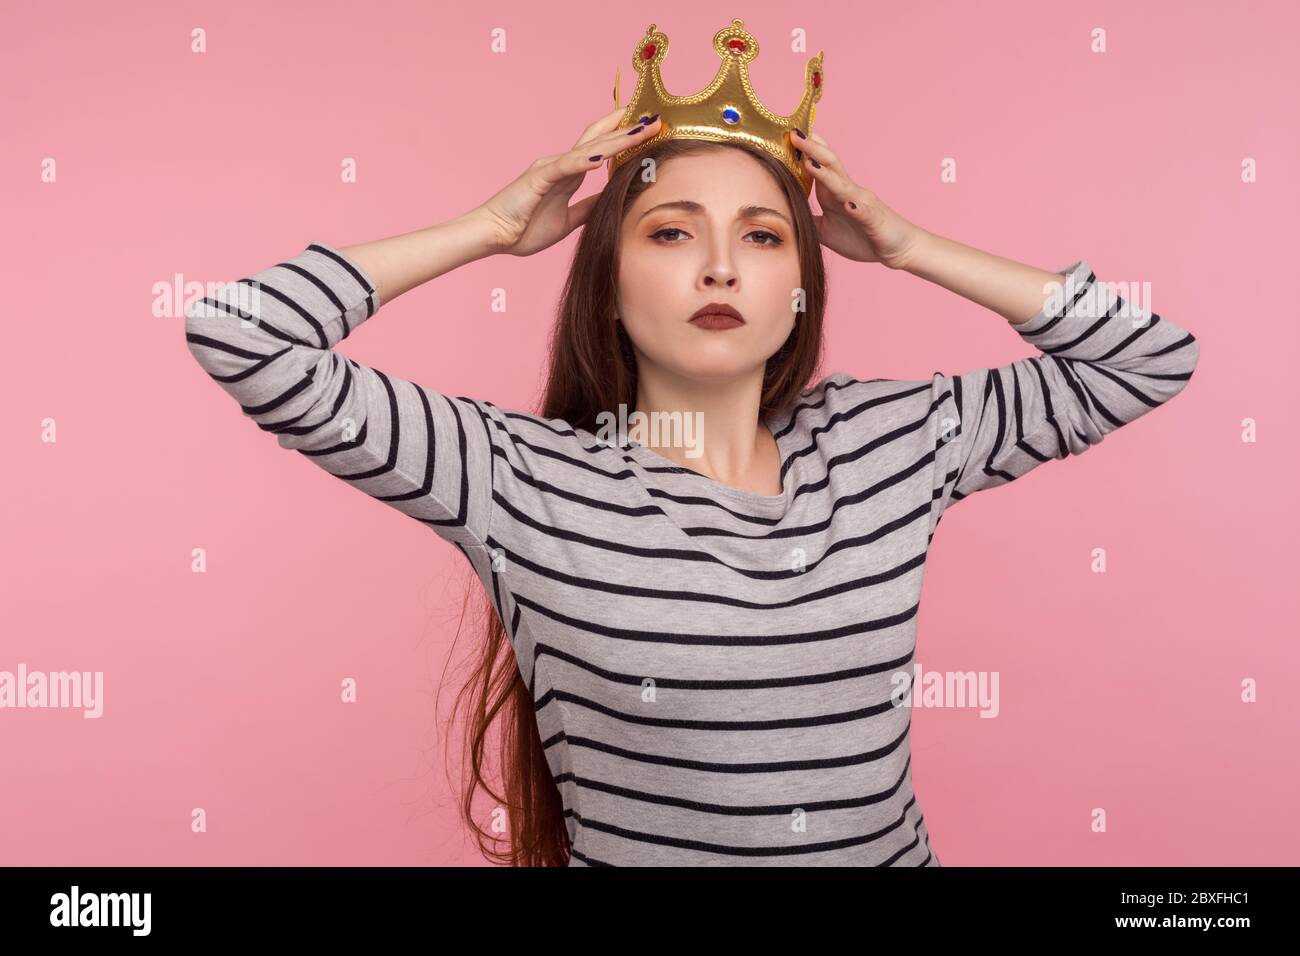 I'm leader! Portrait of ambitious successful woman adjusting golden crown on head and looking with arrogance, declaring her authority, superiority. in Stock Photo